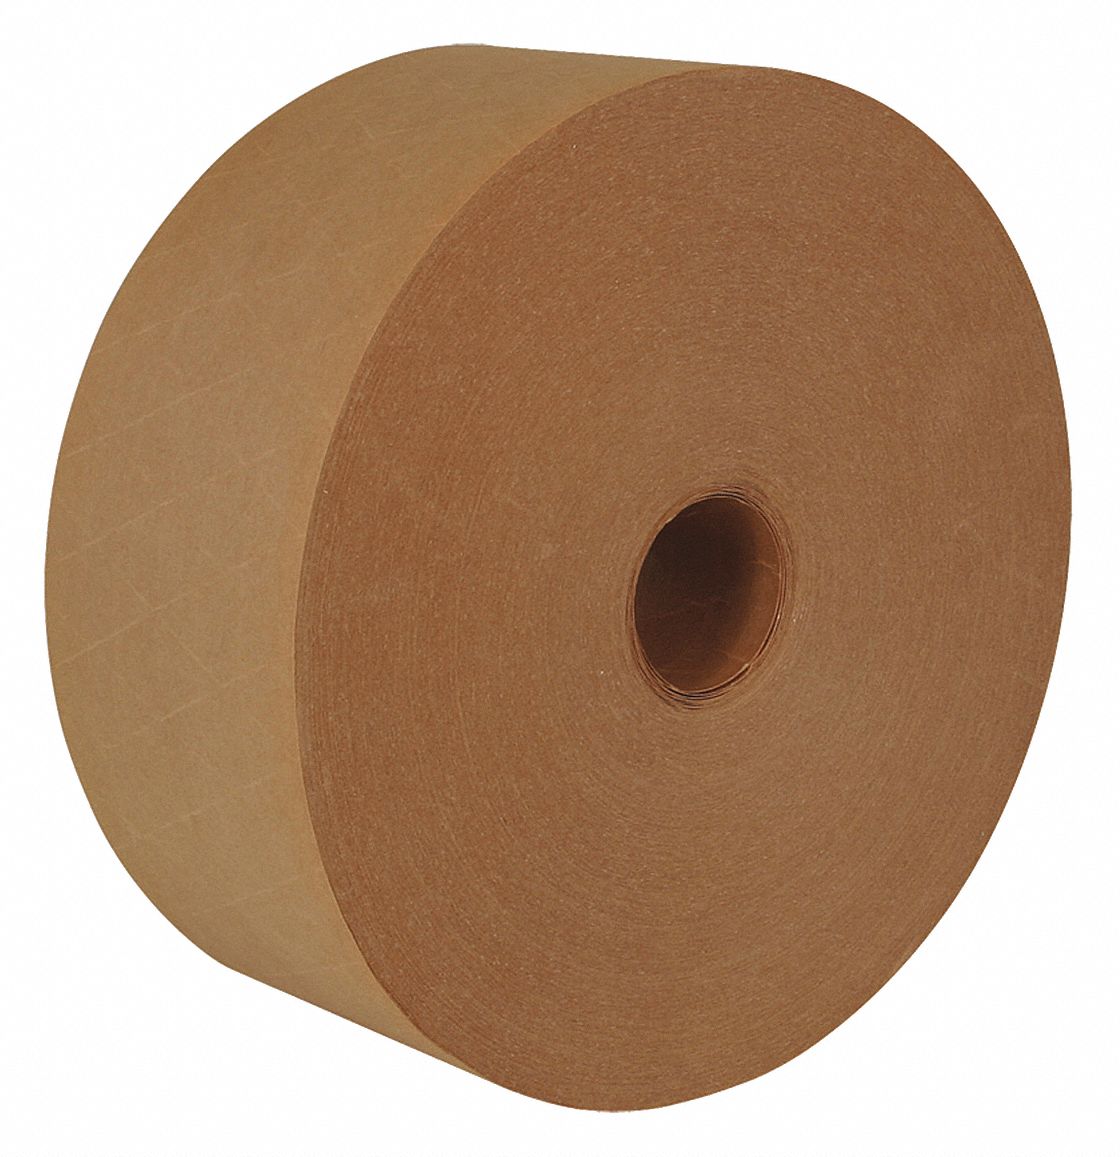 Water-Activated Packaging Tape: 3 in x 375 ft, 76.2 mm x 114.3 m, 6.5 mil Tape Thick, 8 PK